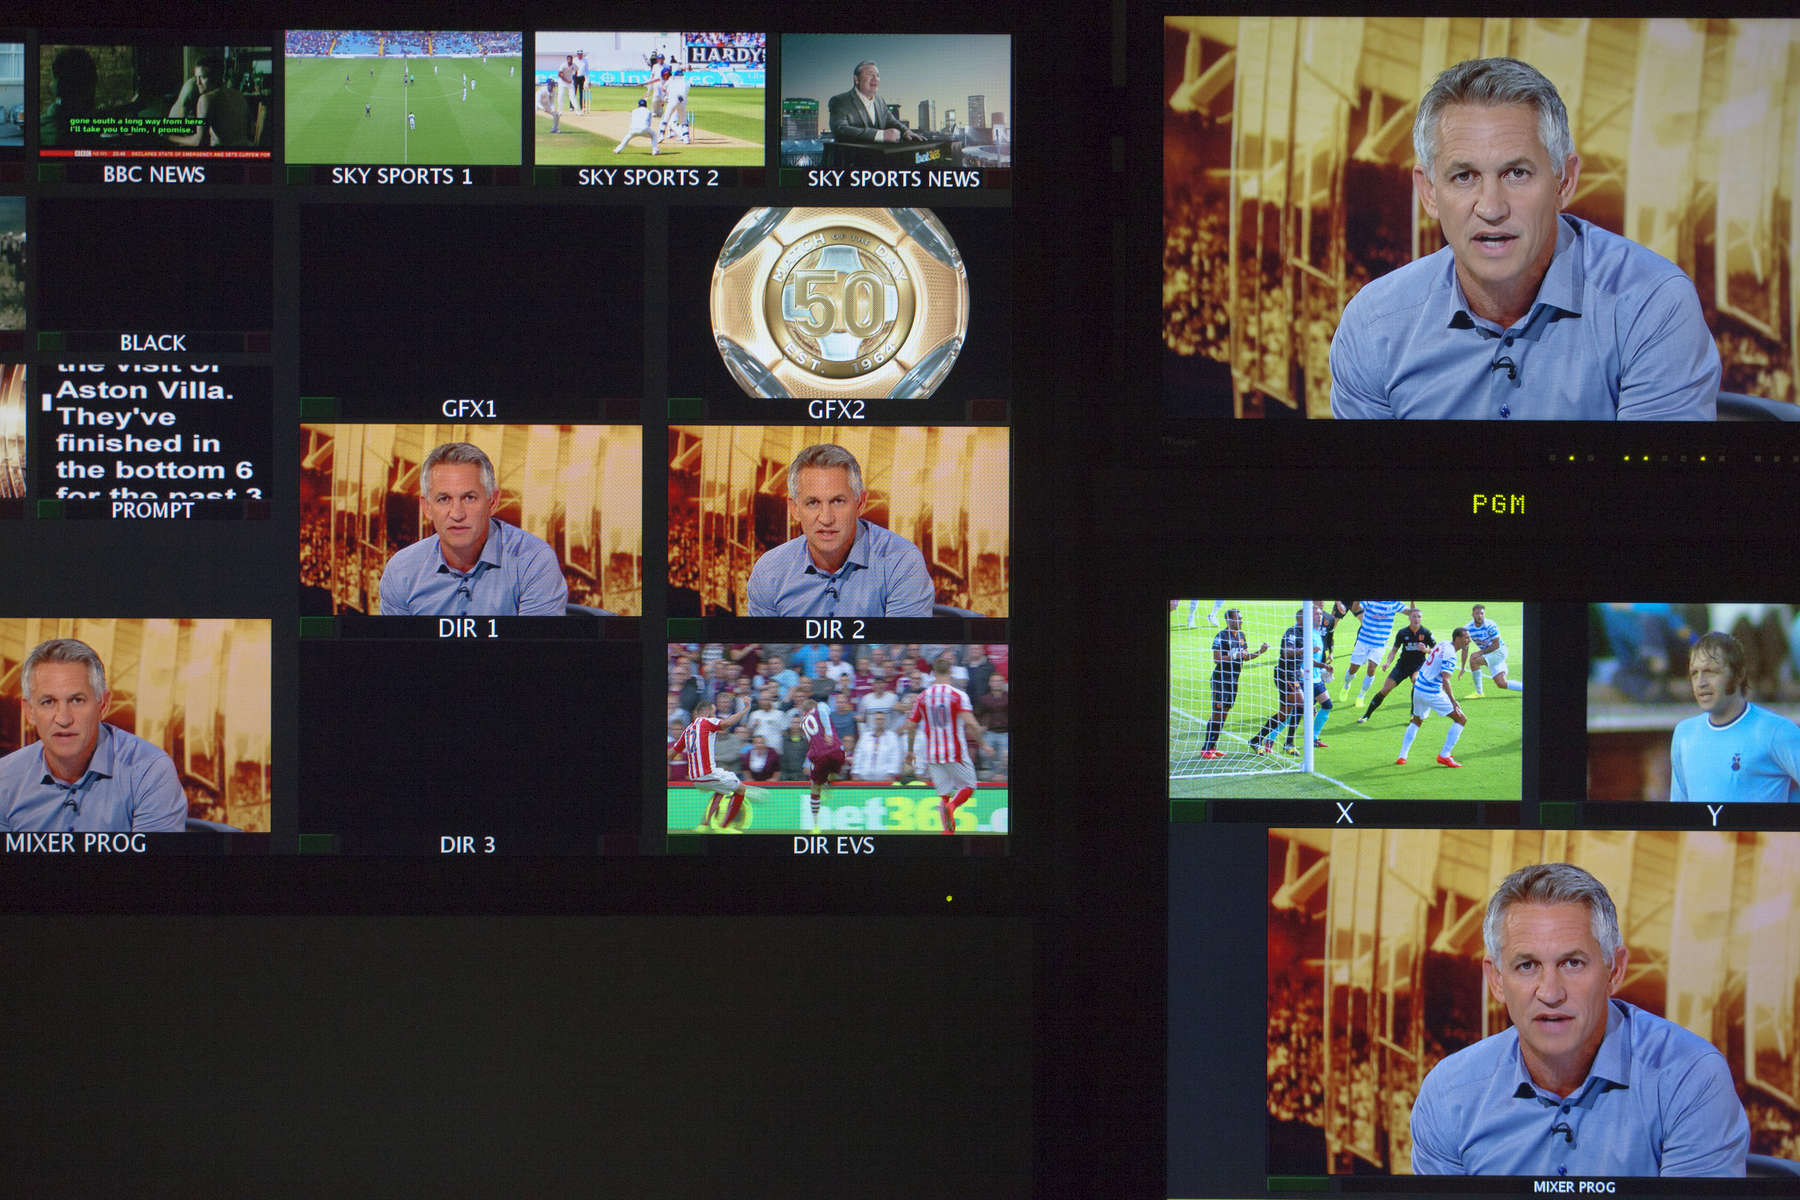 Screens from a BBC production office show the live broadcast of MOTD presenter Gary Lineker.Match of the Day (often abbreviated as MOTD or MotD) is the BBC\'s main football television programme. Typically, it is shown on BBC One on Saturday evenings during the English football season, showing highlights of the day\'s matches in English football\'s top division, the Premier League. It is one of the BBC\'s longest-running shows, having been on air since 22 August 1964, though it has not always been aired regularly. The programme is broadcast from MediaCityUK in Salford Quays on the banks of the Manchester Ship Canal in Greater Manchester.Since 1999 MOTD has been presented by the former England captain Gary Lineker. Lineker is usually joined by two pundits to analyse and review the day\'s action. The former Newcastle United captain Alan Shearer is the lead pundit